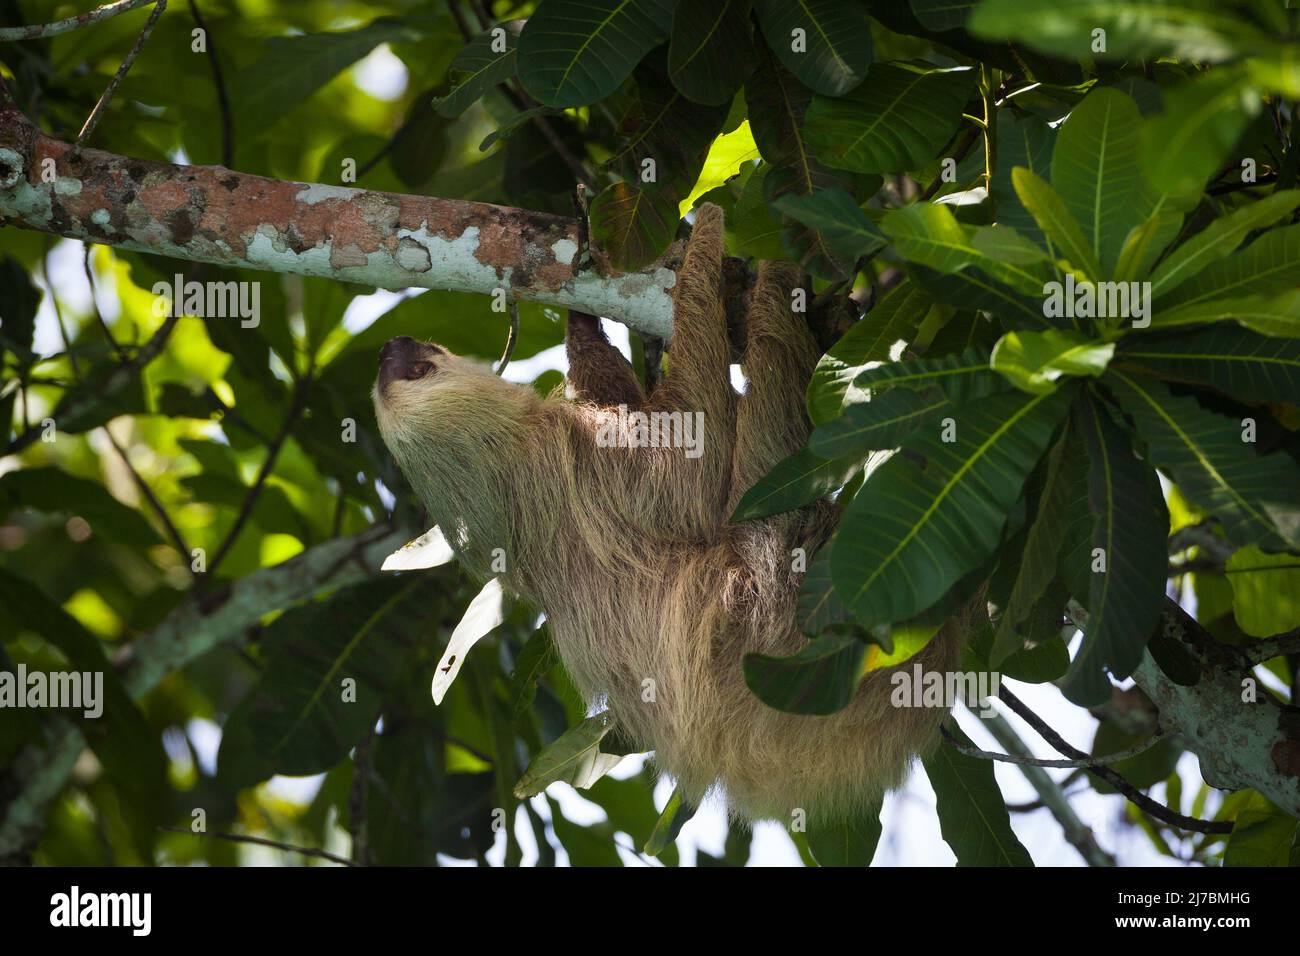 Panama wildllife with a two-toed sloth, Choloepus hoffmanni, in the rainforest of Soberania national park, Colon province, Republic of Panama. Stock Photo